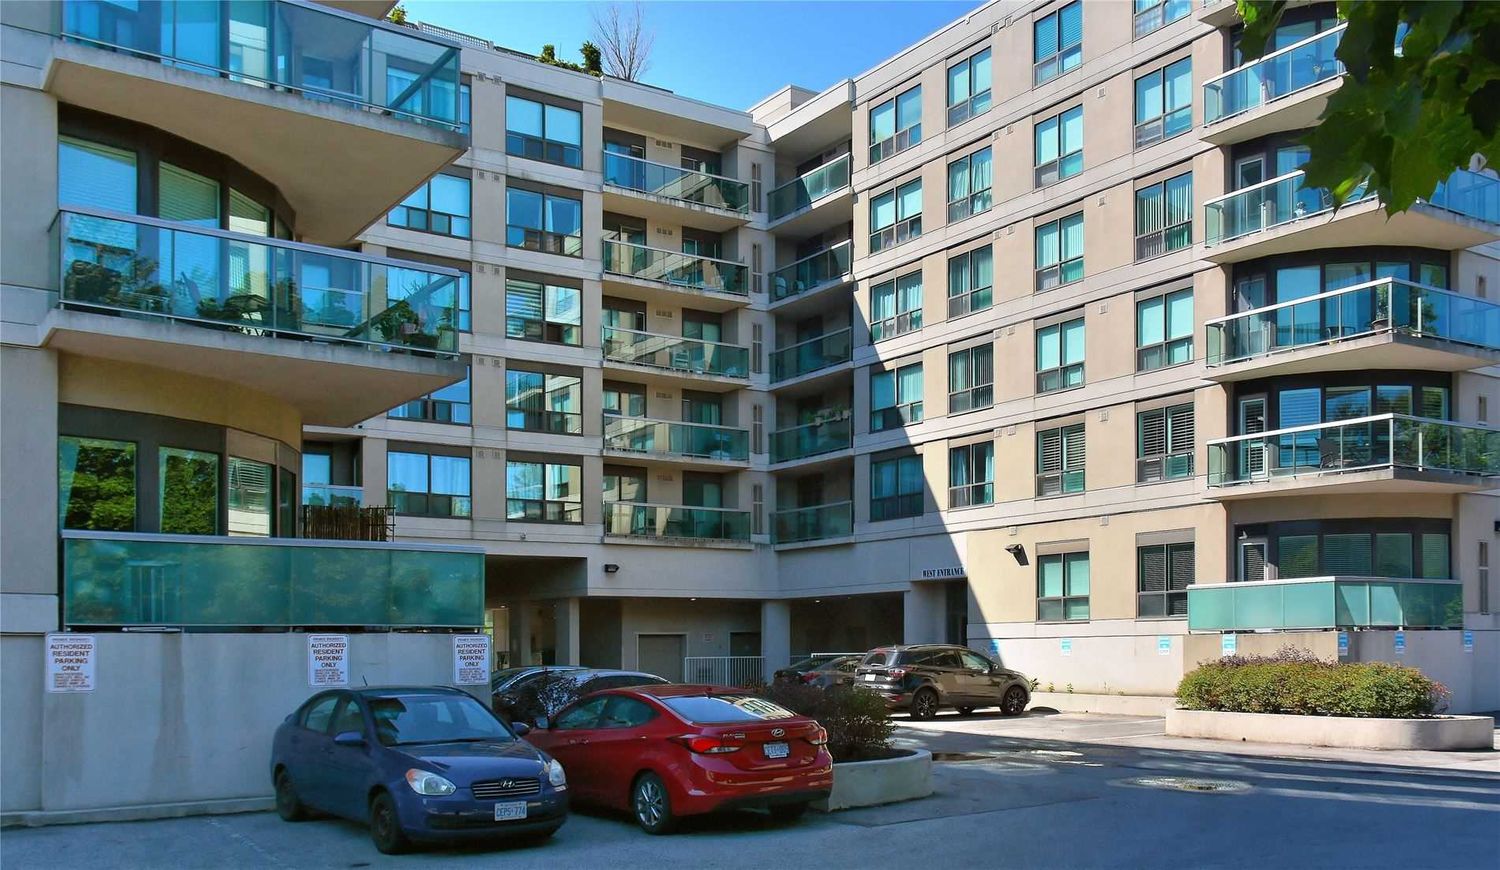 890 Sheppard Avenue W. Plaza Suites Condos is located in  North York, Toronto - image #3 of 3